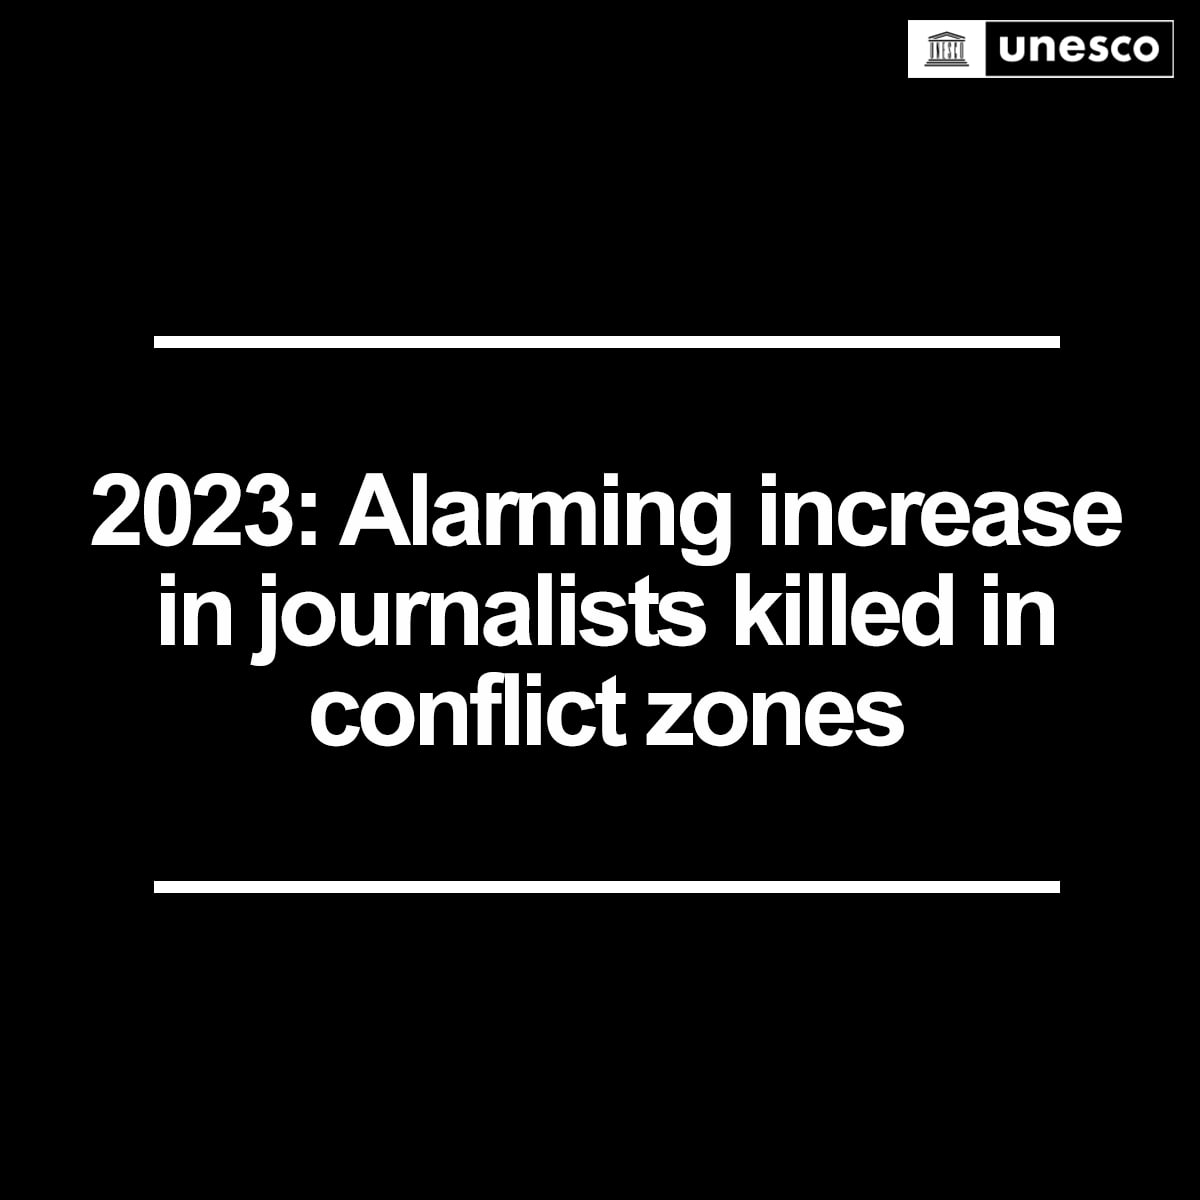 2023 marks the deadliest year for conflict-zone journalists, with 38 killed. @UNESCO calls for global action to protect journalists as civilians under international law. Journalists also face attacks and information access challenges. #PressFreedom #JournalistsSafety